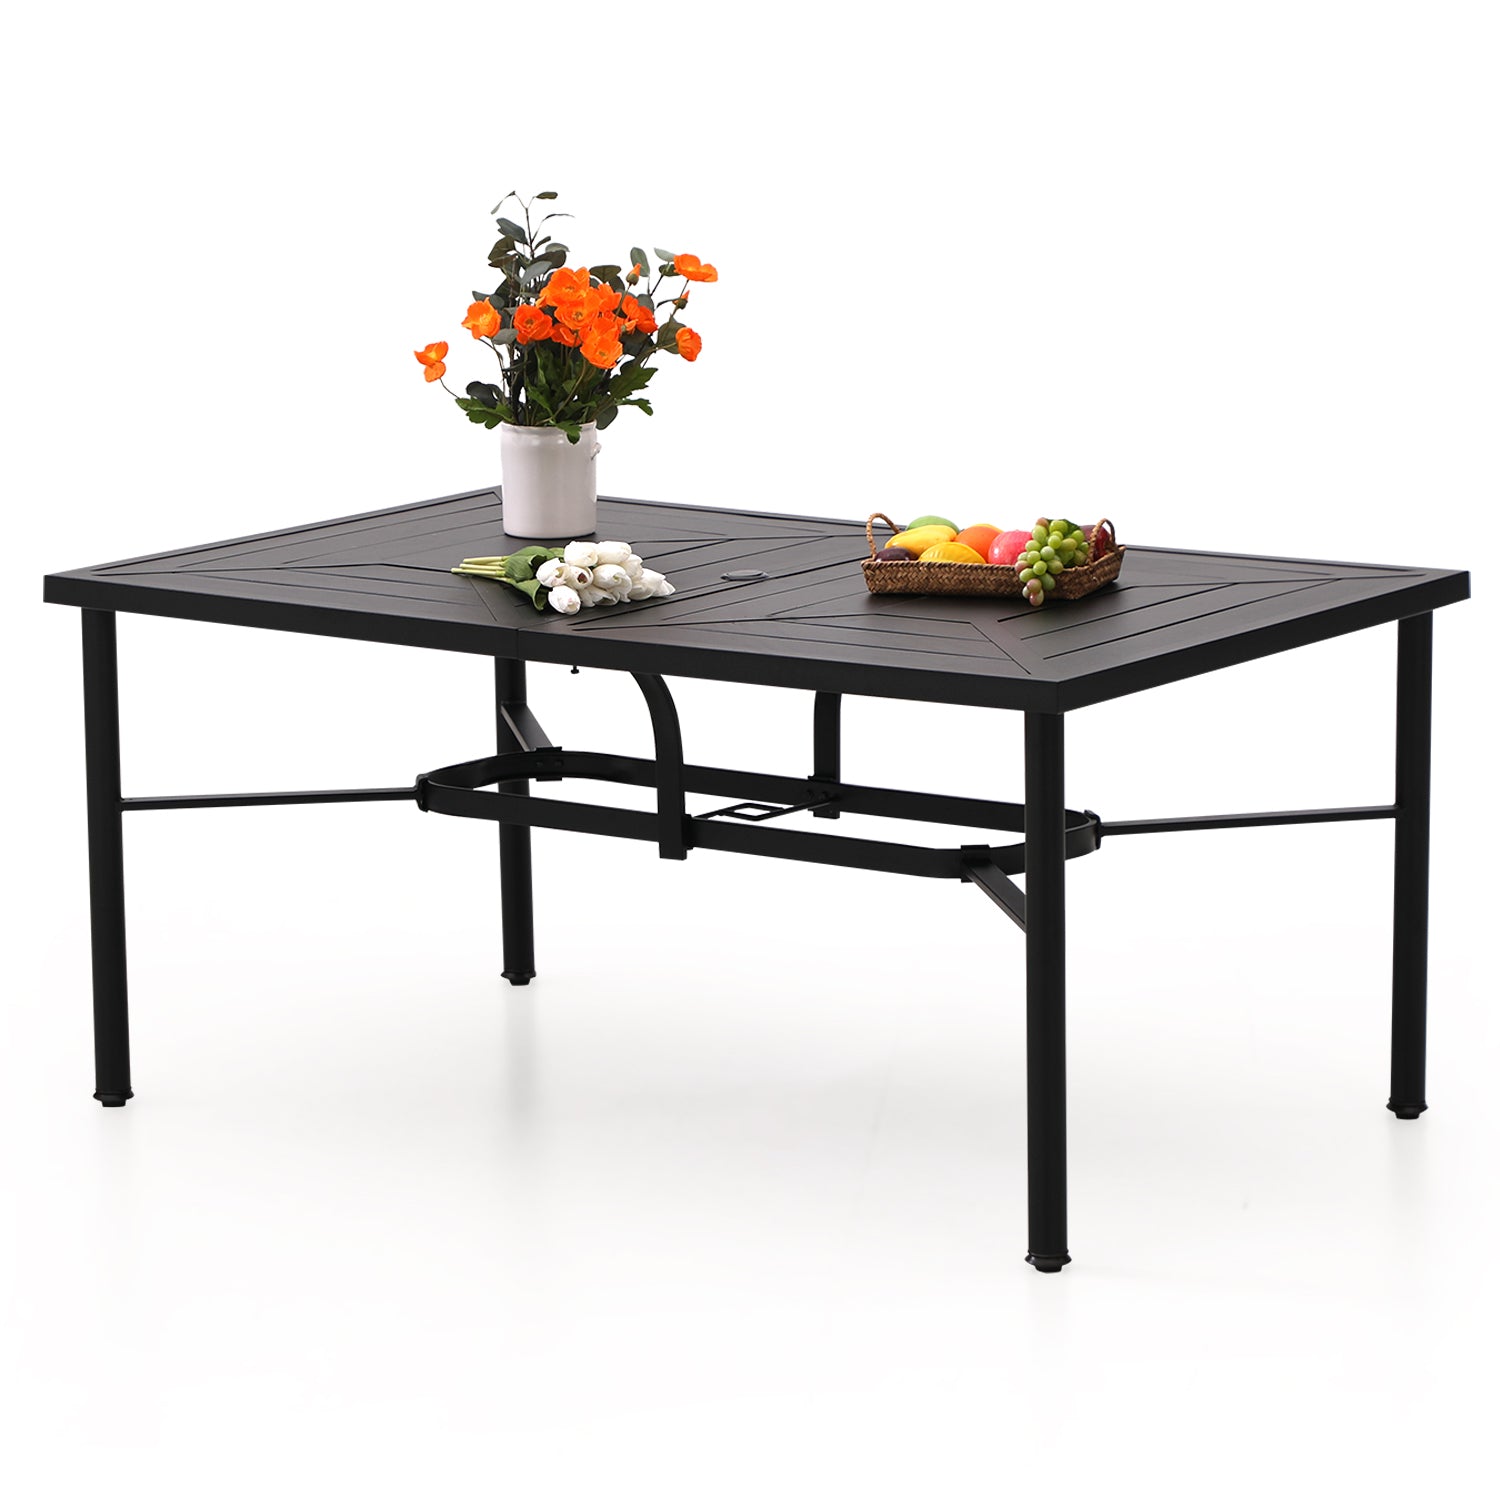 MFSTUDIO Geometric Stamped Rectangle Steel Table, Table for 6 People